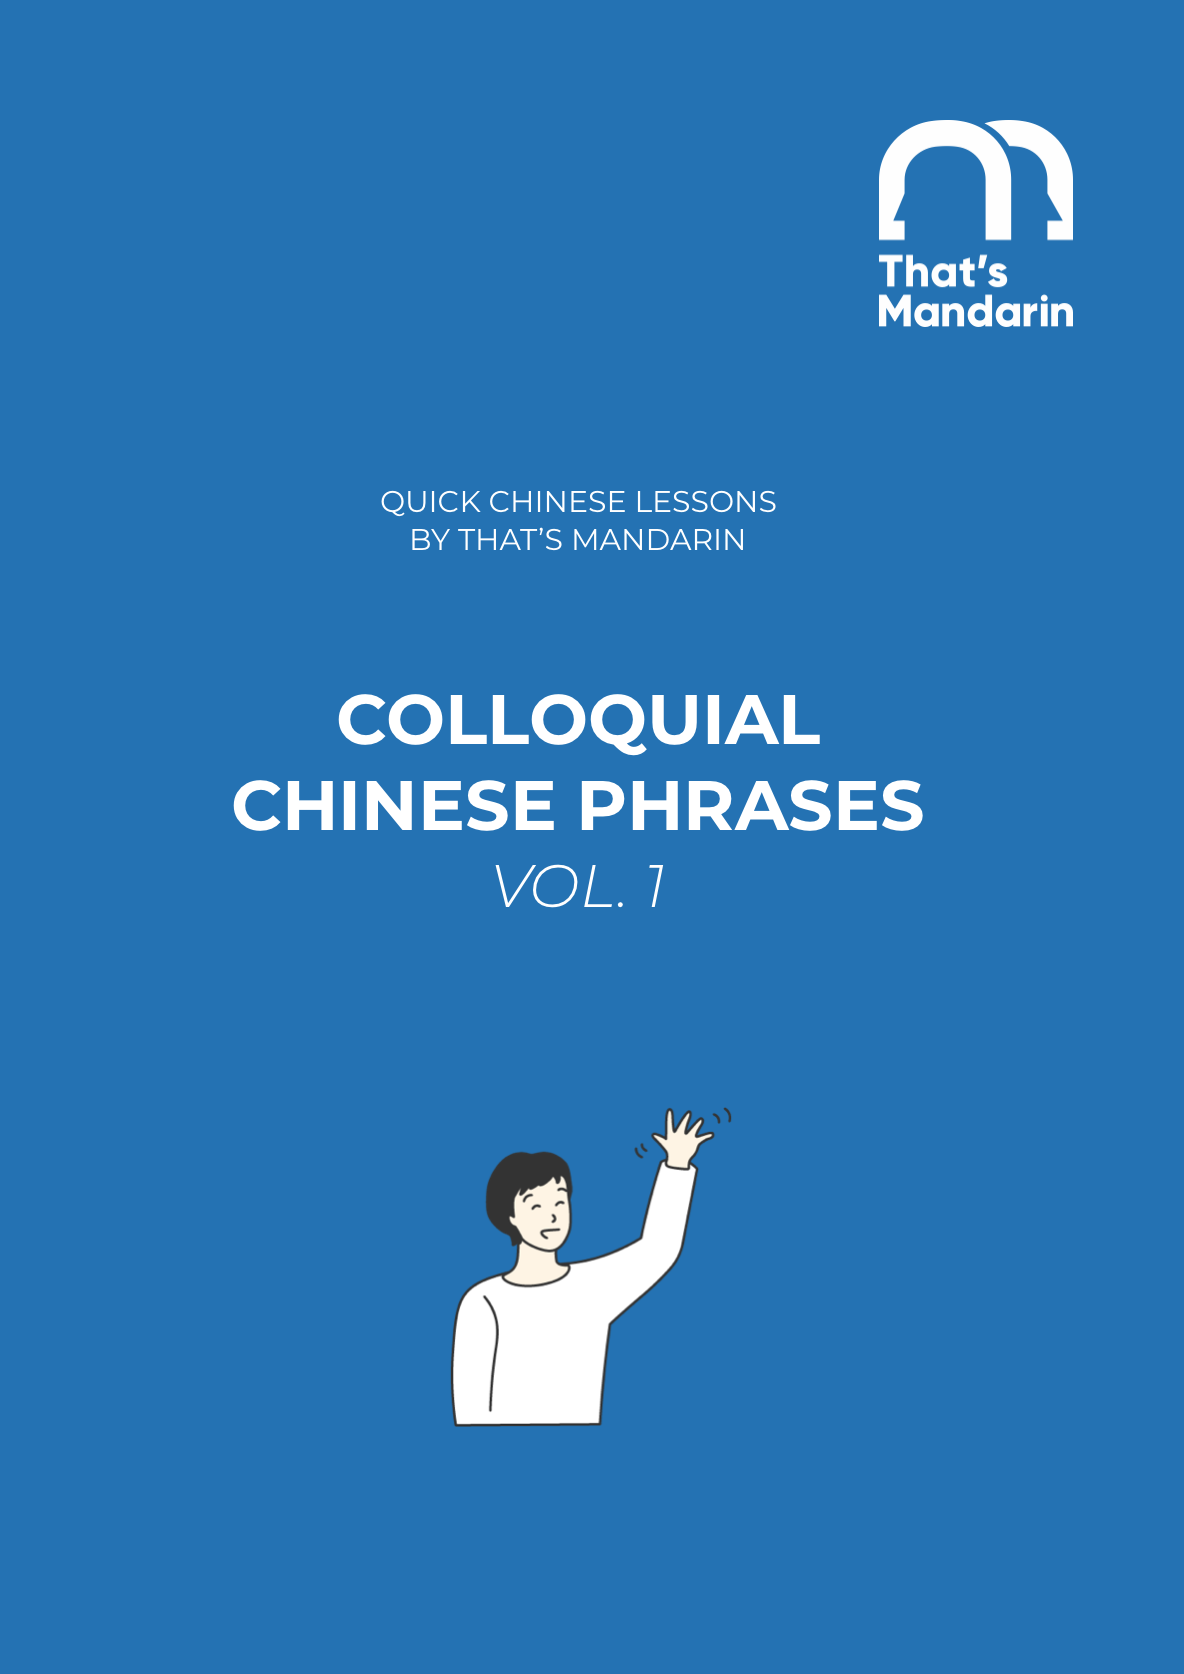 Colloquial Chinese Phrases, Vol. 1 by That's Mandarin PDF